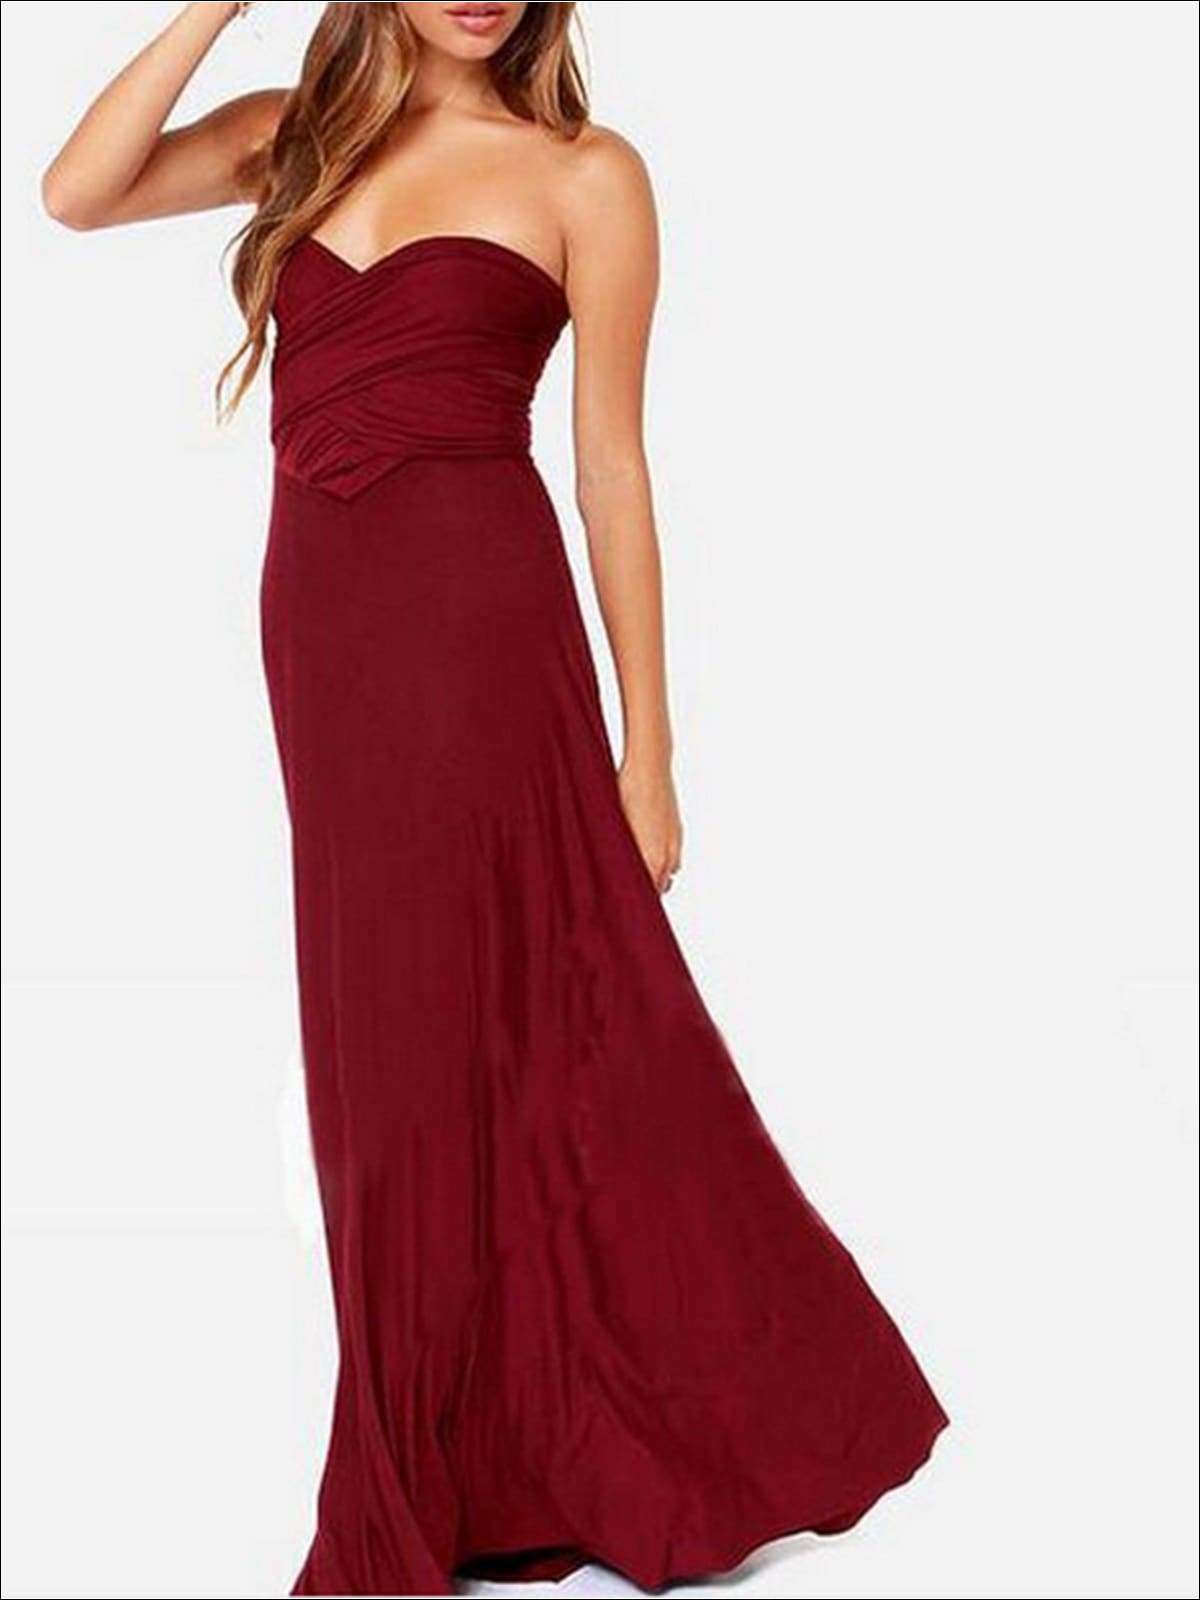 Womens Fit And Flare Infinity Convertible Wrap Dress (Multicolor Options) - Burgundy / S - Womens Dresses